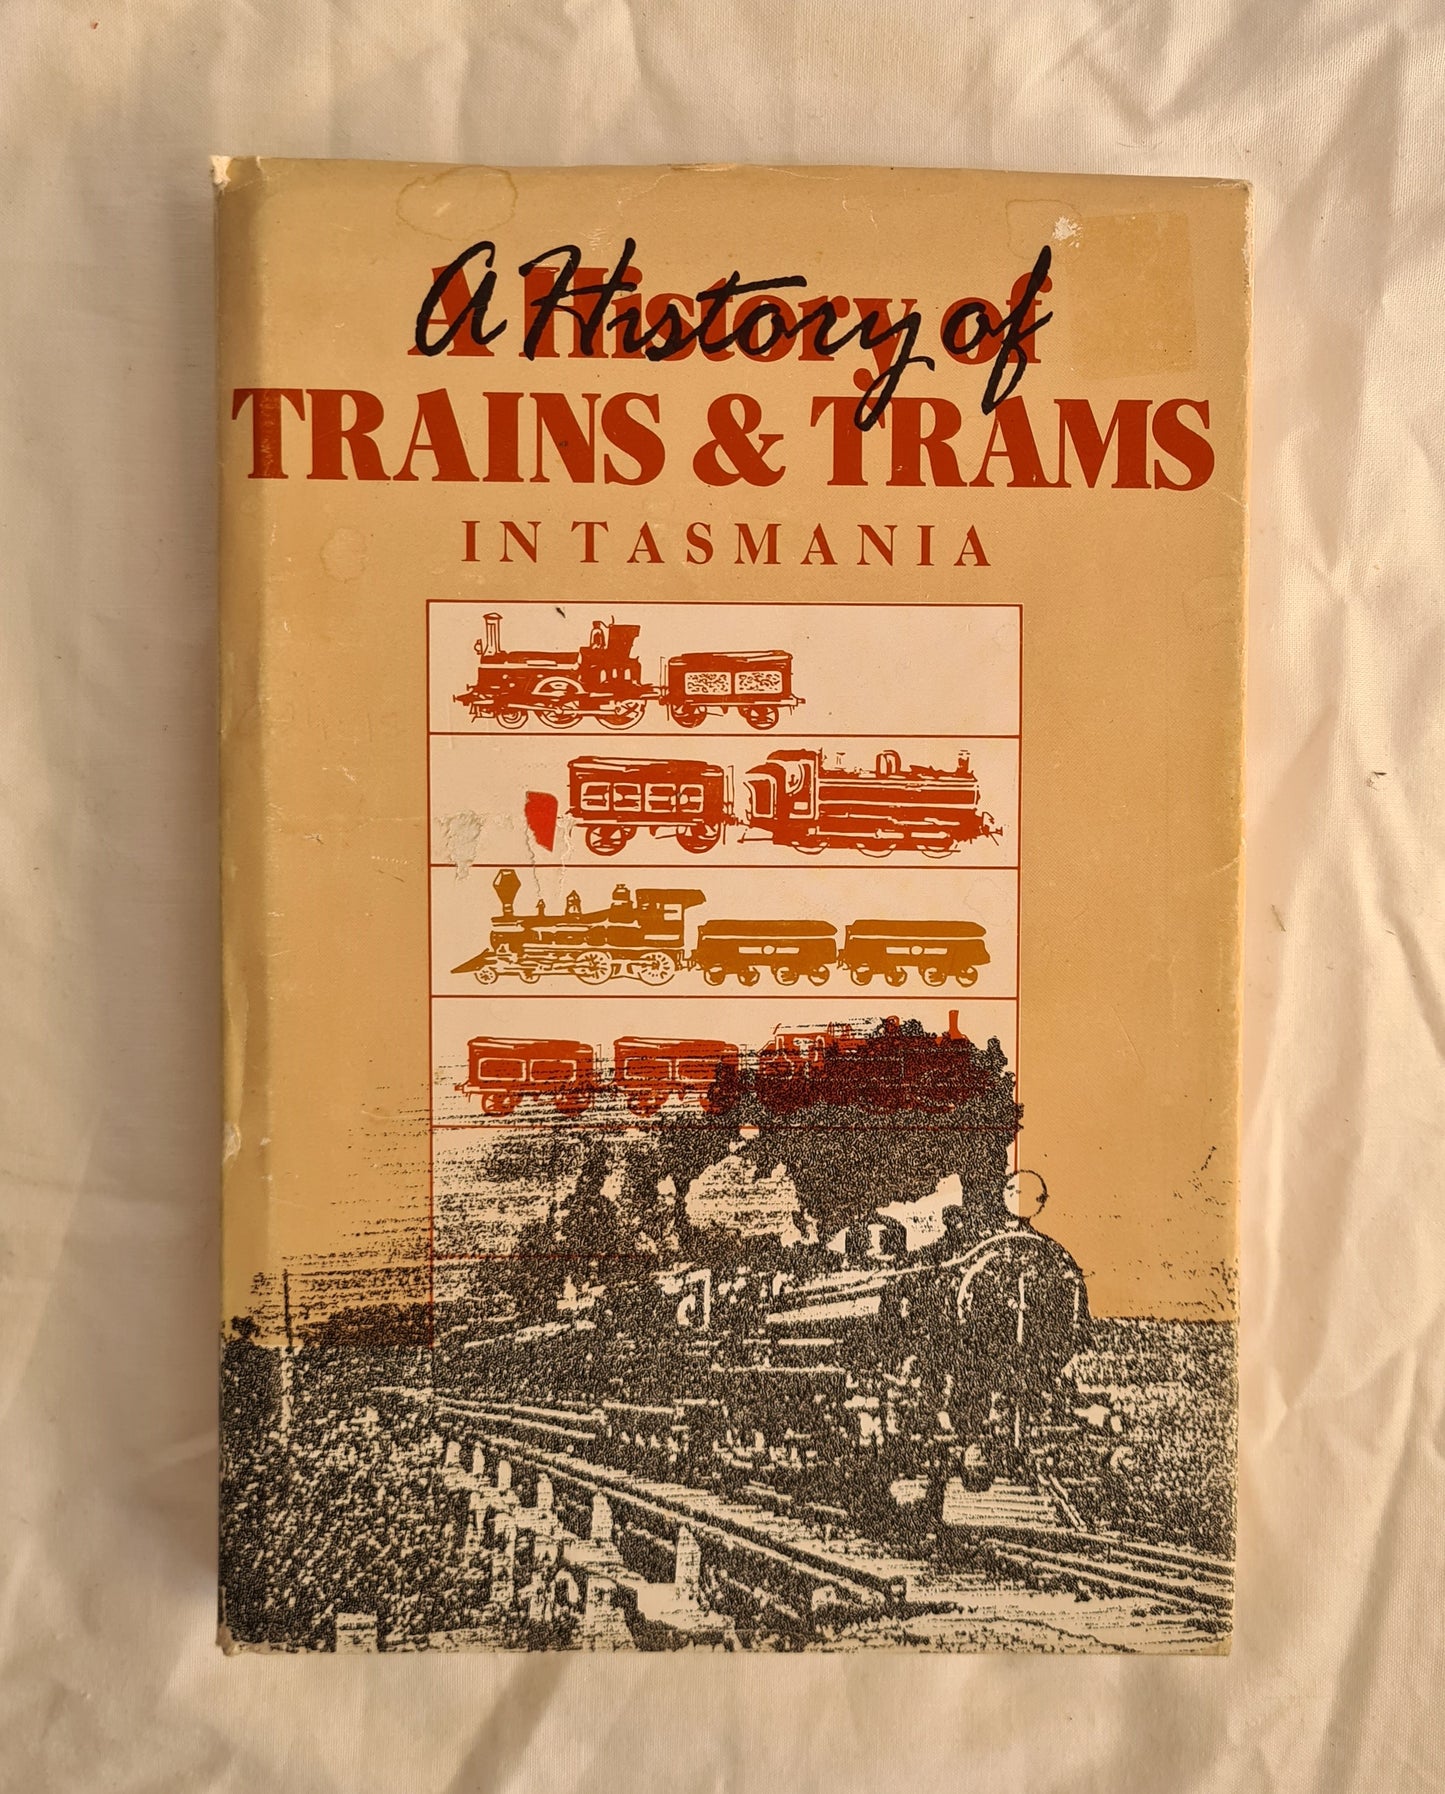 A History of Trains & Trams in Tasmania  by Thomas C. T. Cooley